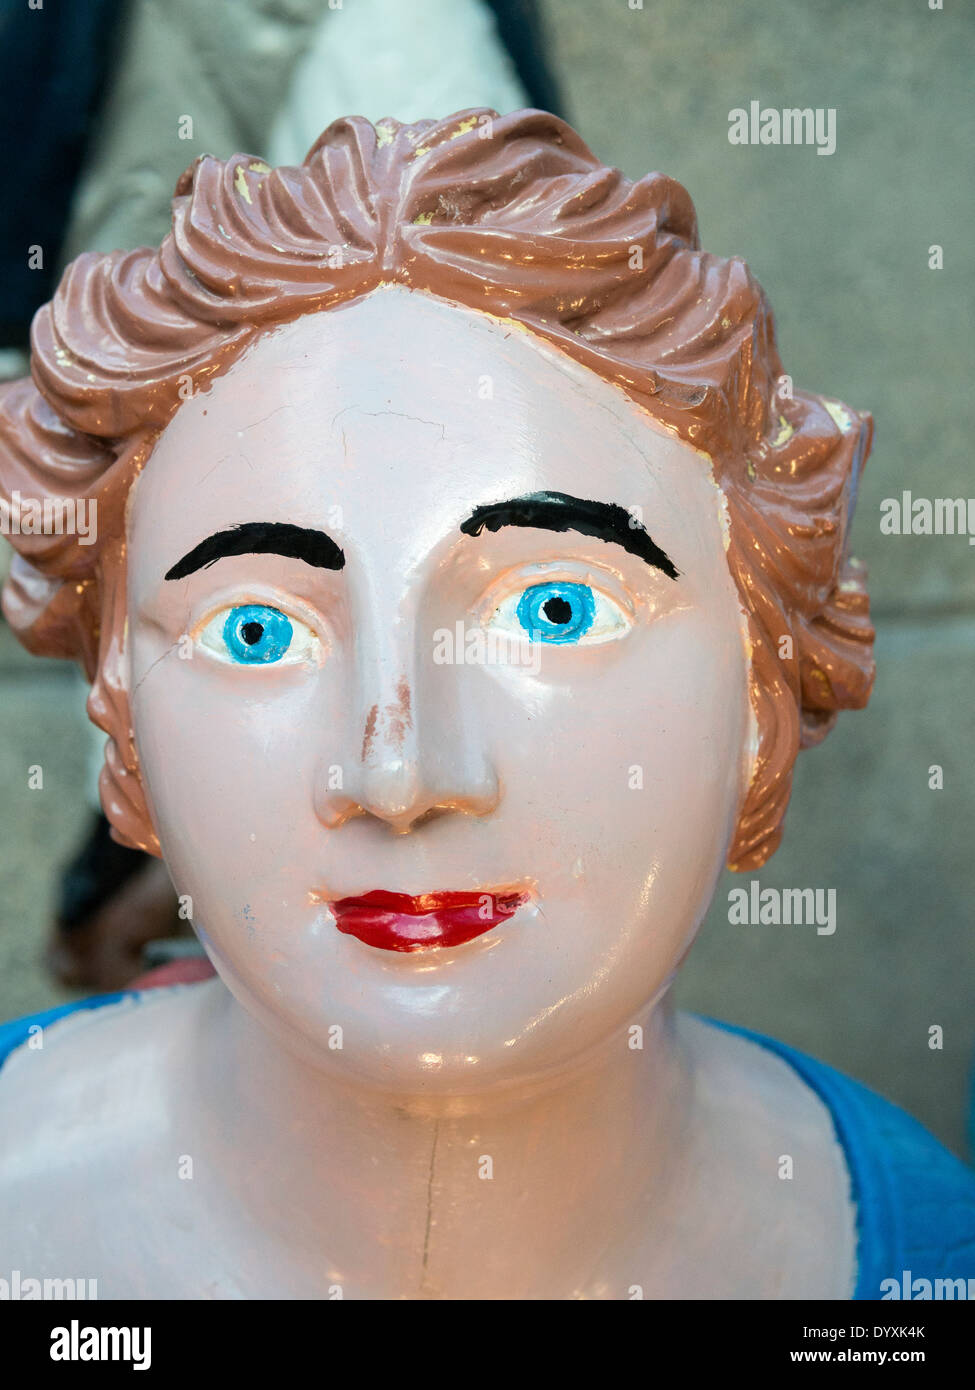 Sailing ship figureheads in the Cutty Sark Exhibition,Greenwich,london,UK Stock Photo